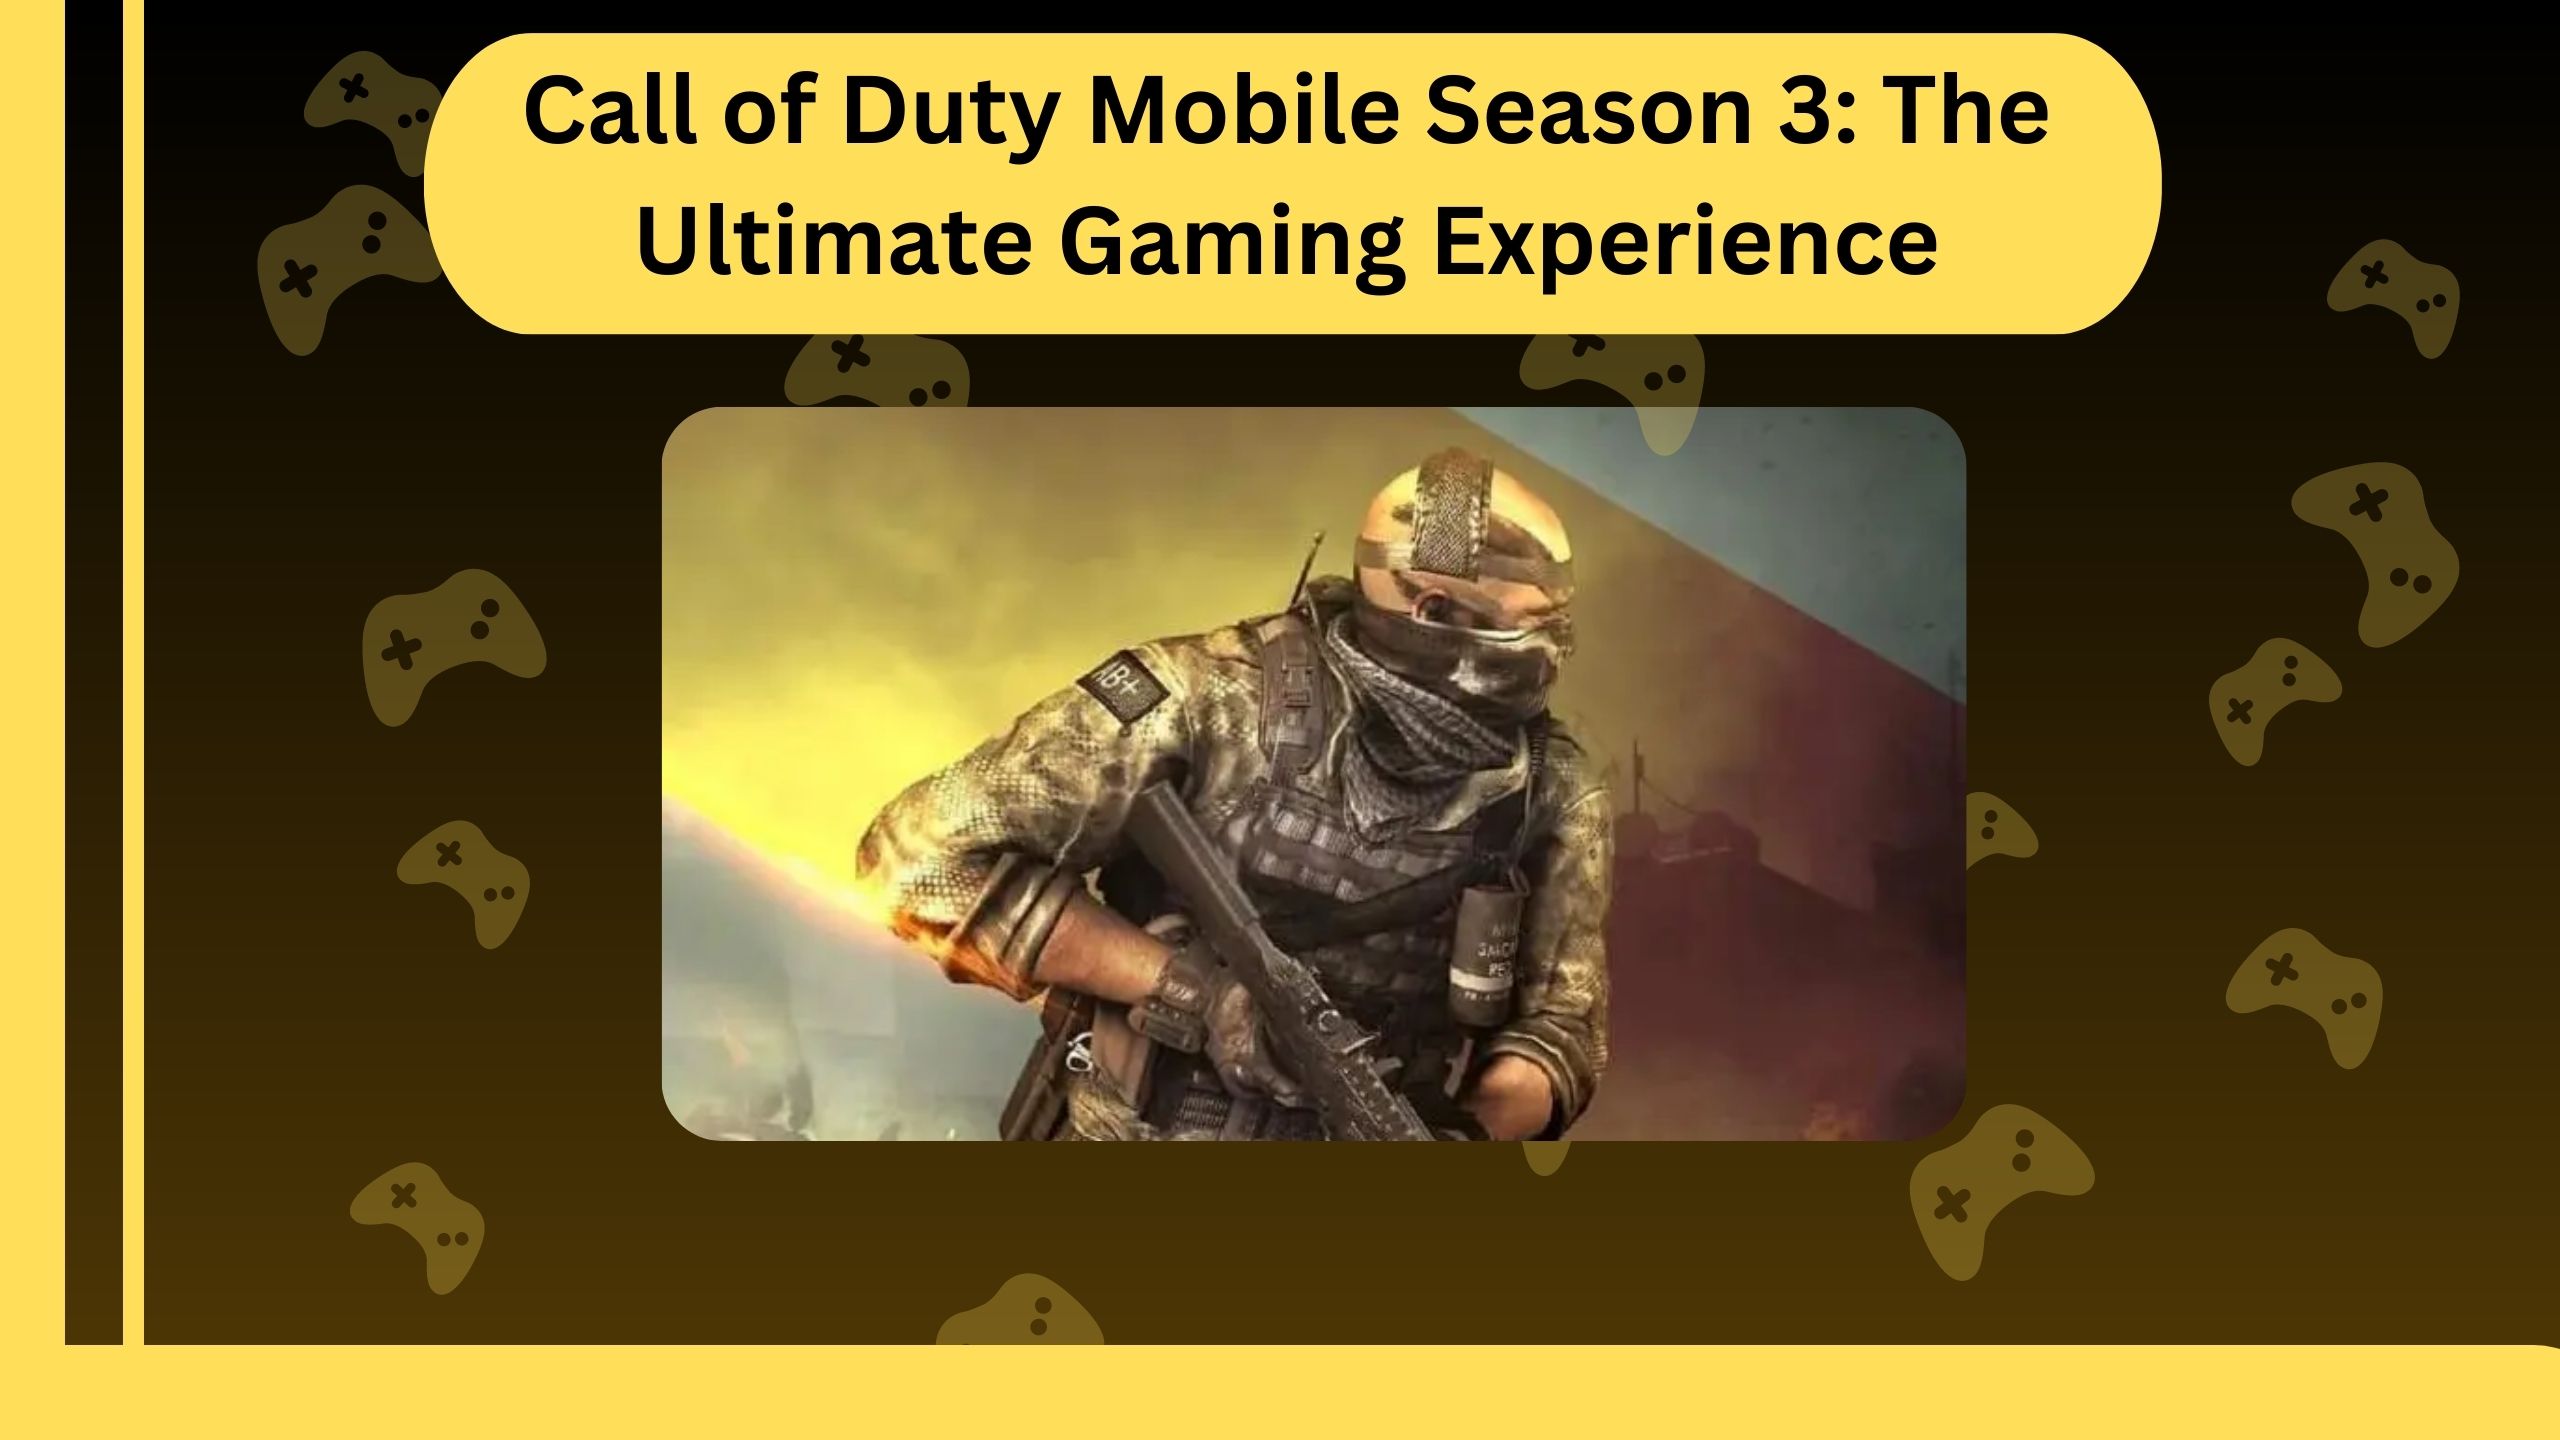 Call of Duty Mobile Season 3: The Ultimate Gaming Experience